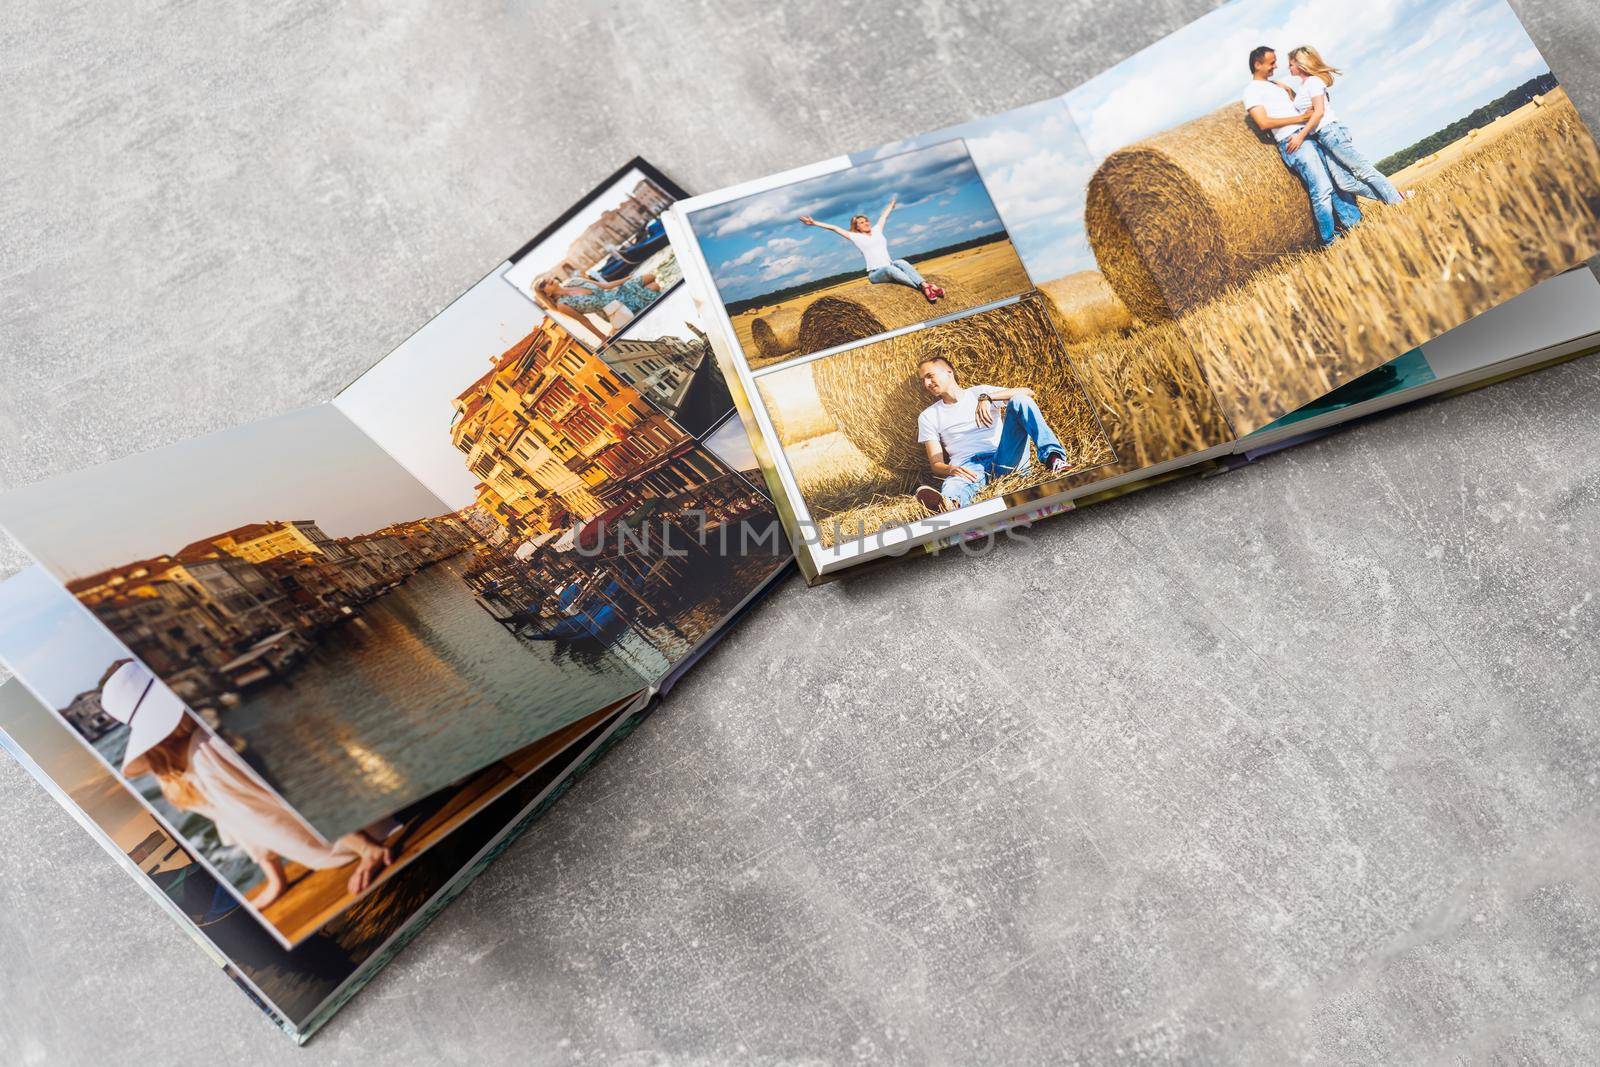 Photobook Album with Travel Photo on Table by Andelov13